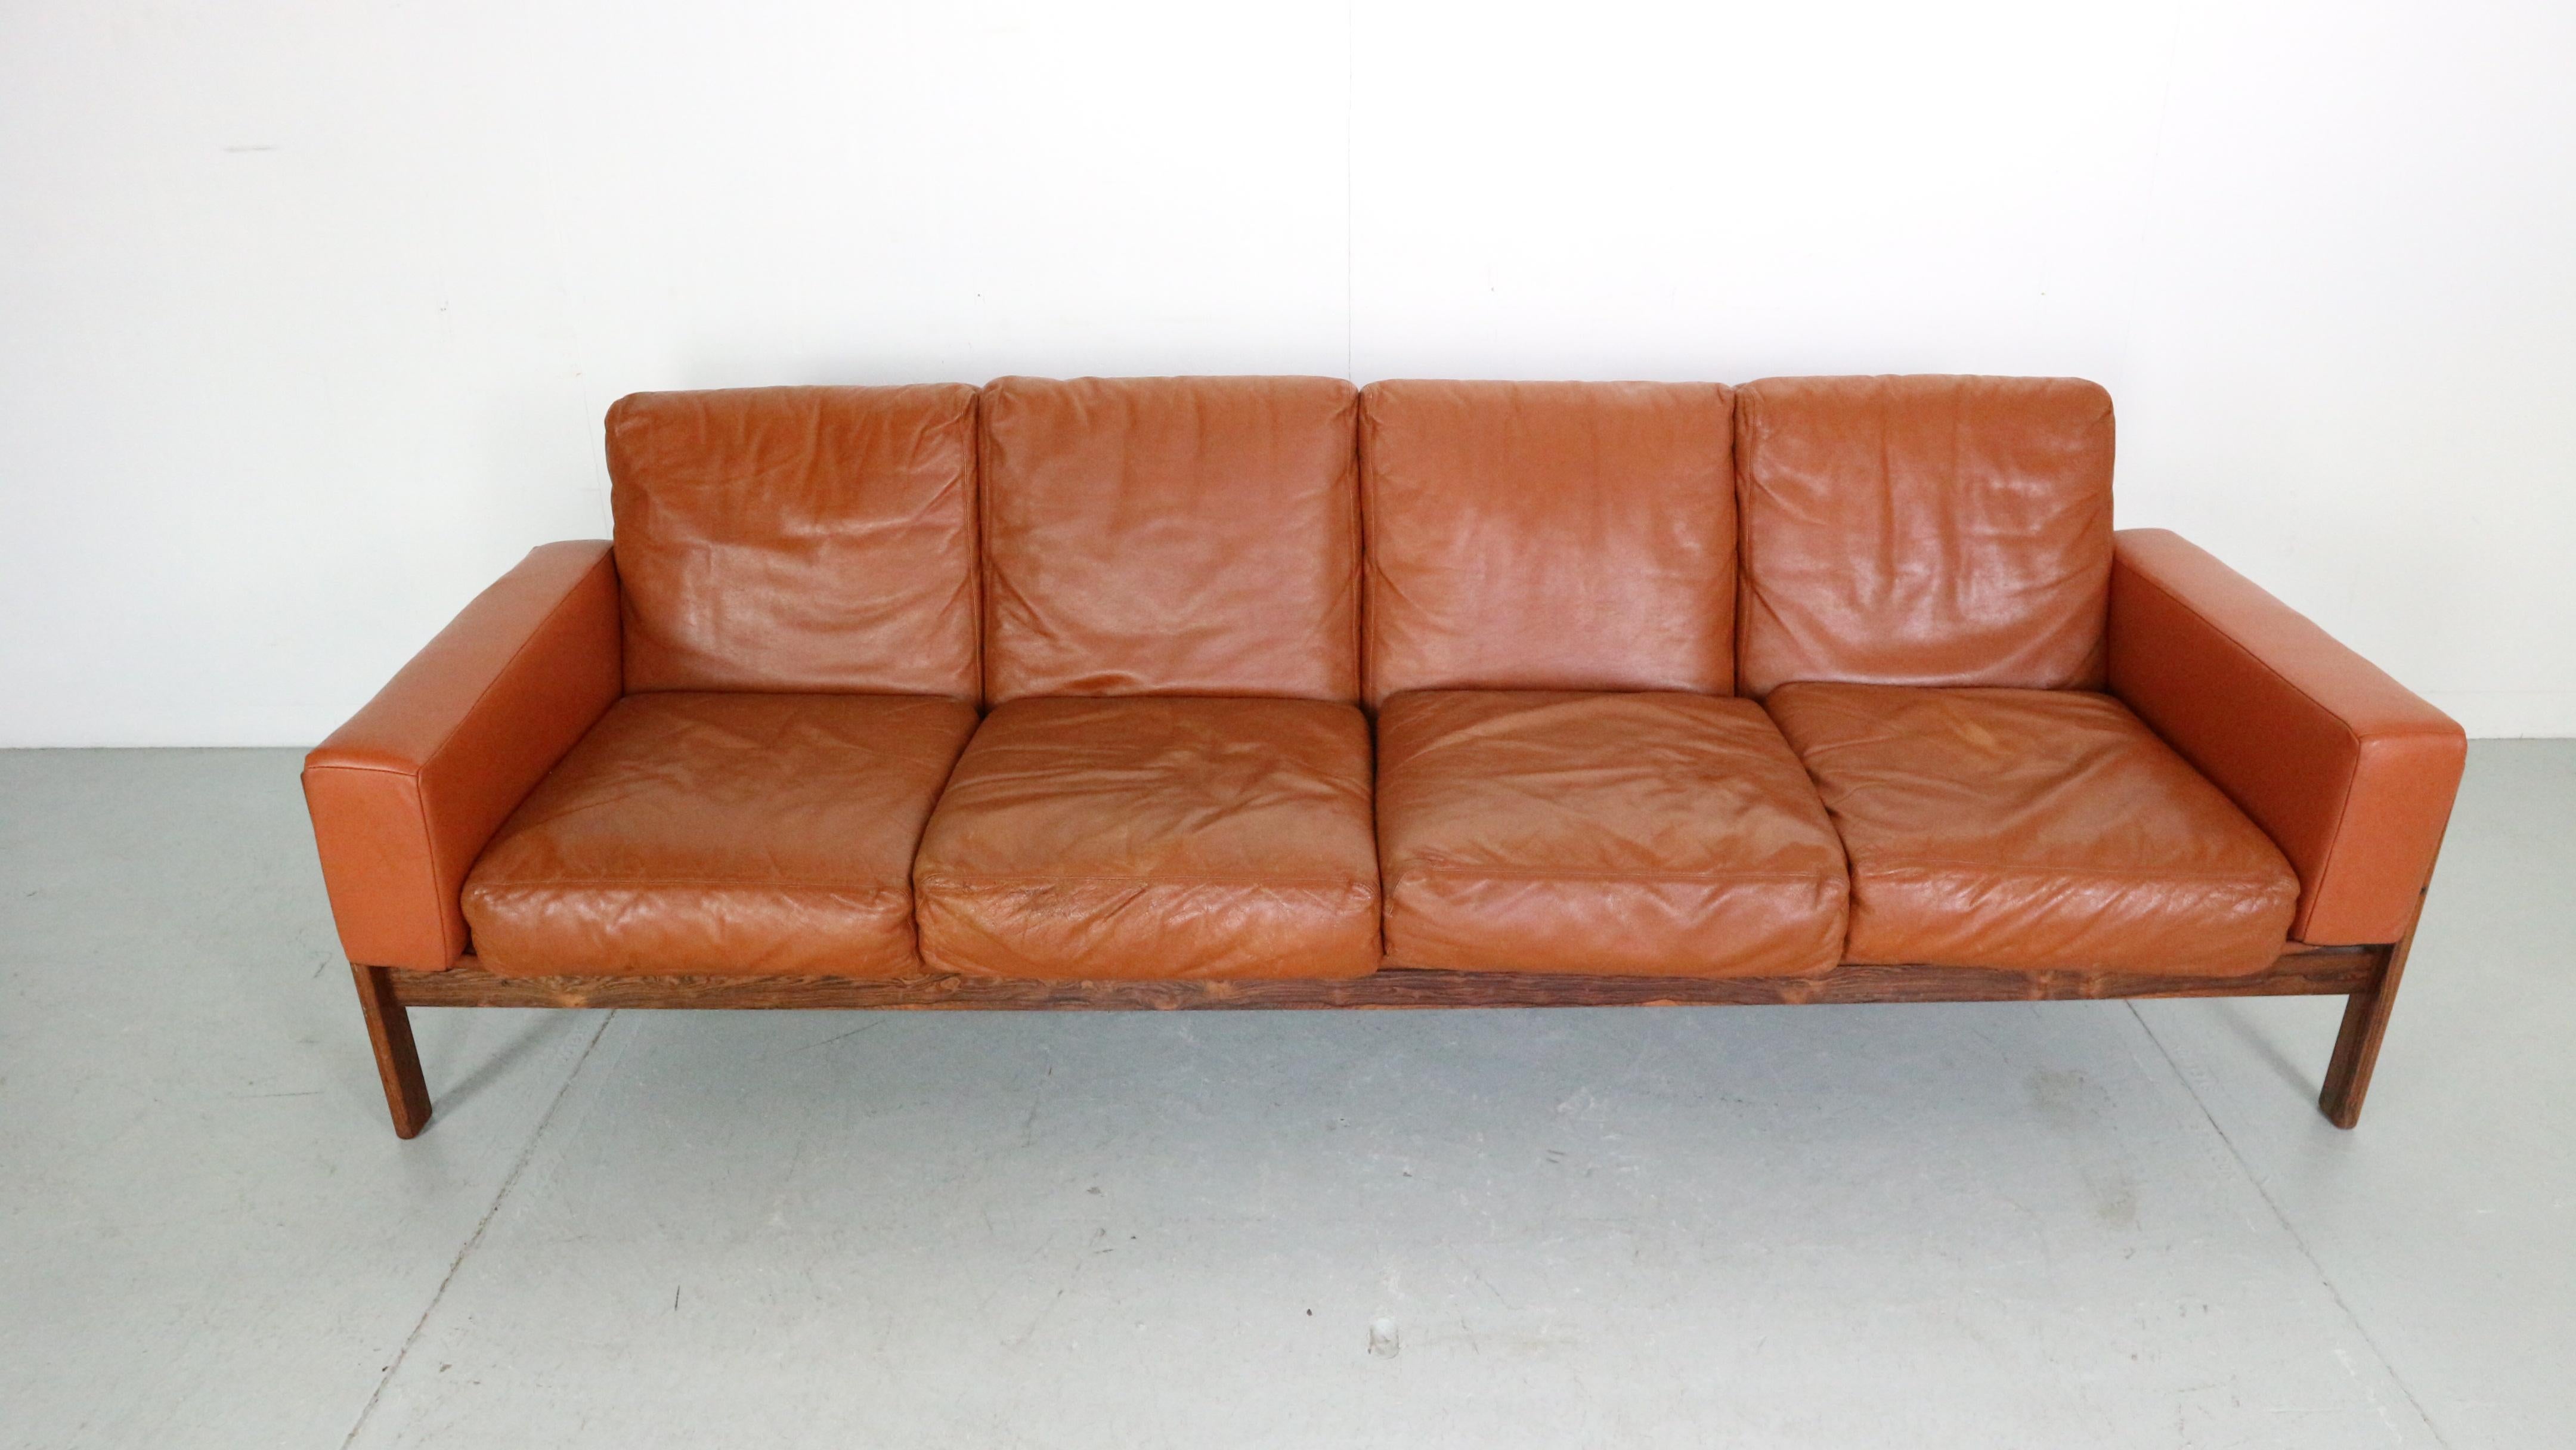 Mid-Century Modern Sven Ivar Dysthe  4-Seater Congac Leather Sofa for Dokka Møbler, 1960's Norway